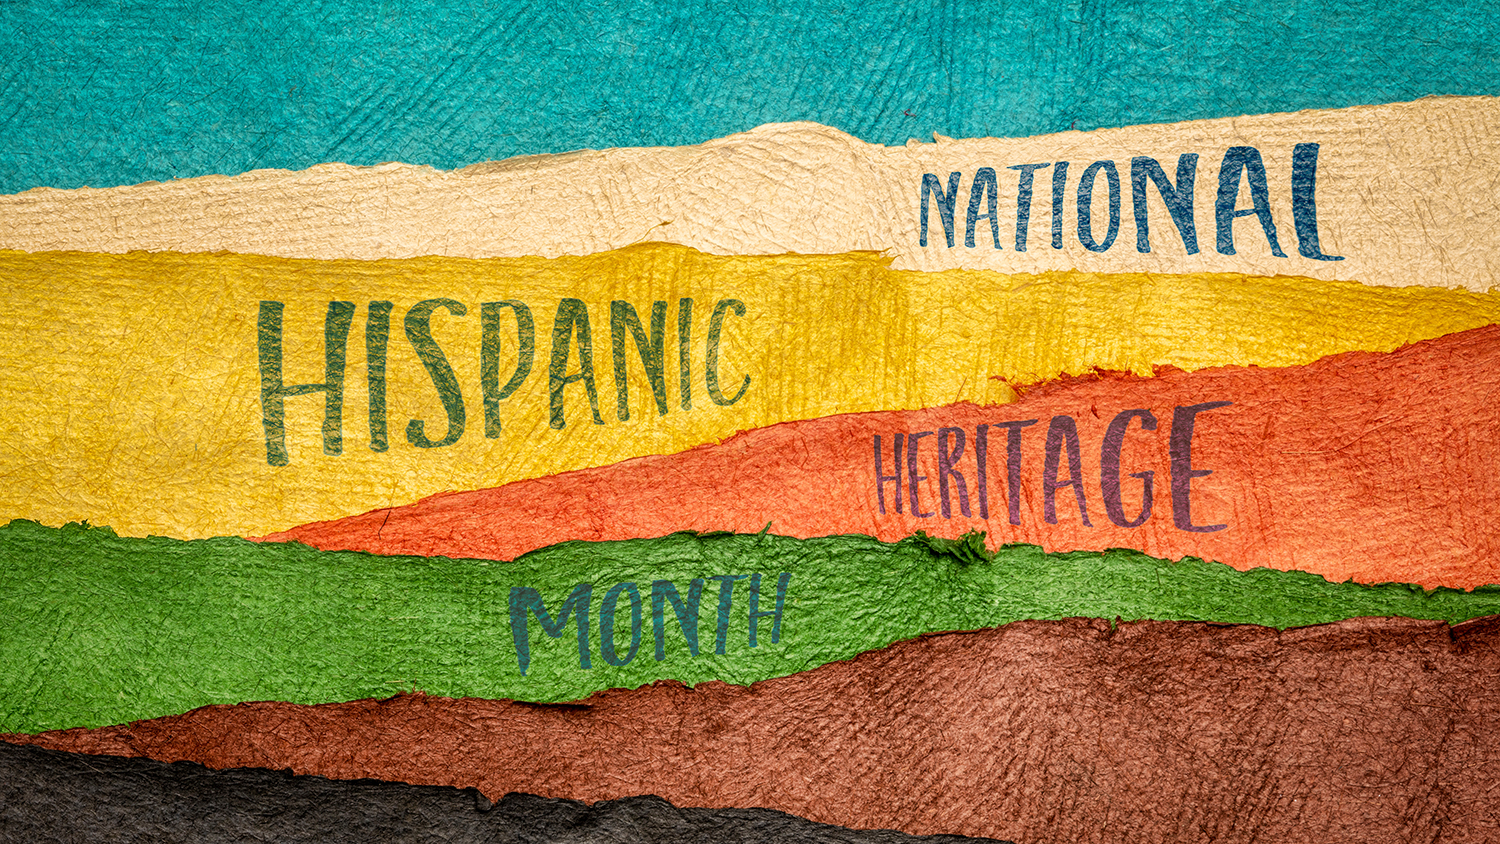 Handwriting that says "National Hispanic Heritage Month" on Huun paper handmade in Mexico. Strips of colorful paper are overlaid horizontally. From top to bottom, the strips are teal, tan, yellow, reddish orange, green, brown, dark brown. The words are written on the central layers.